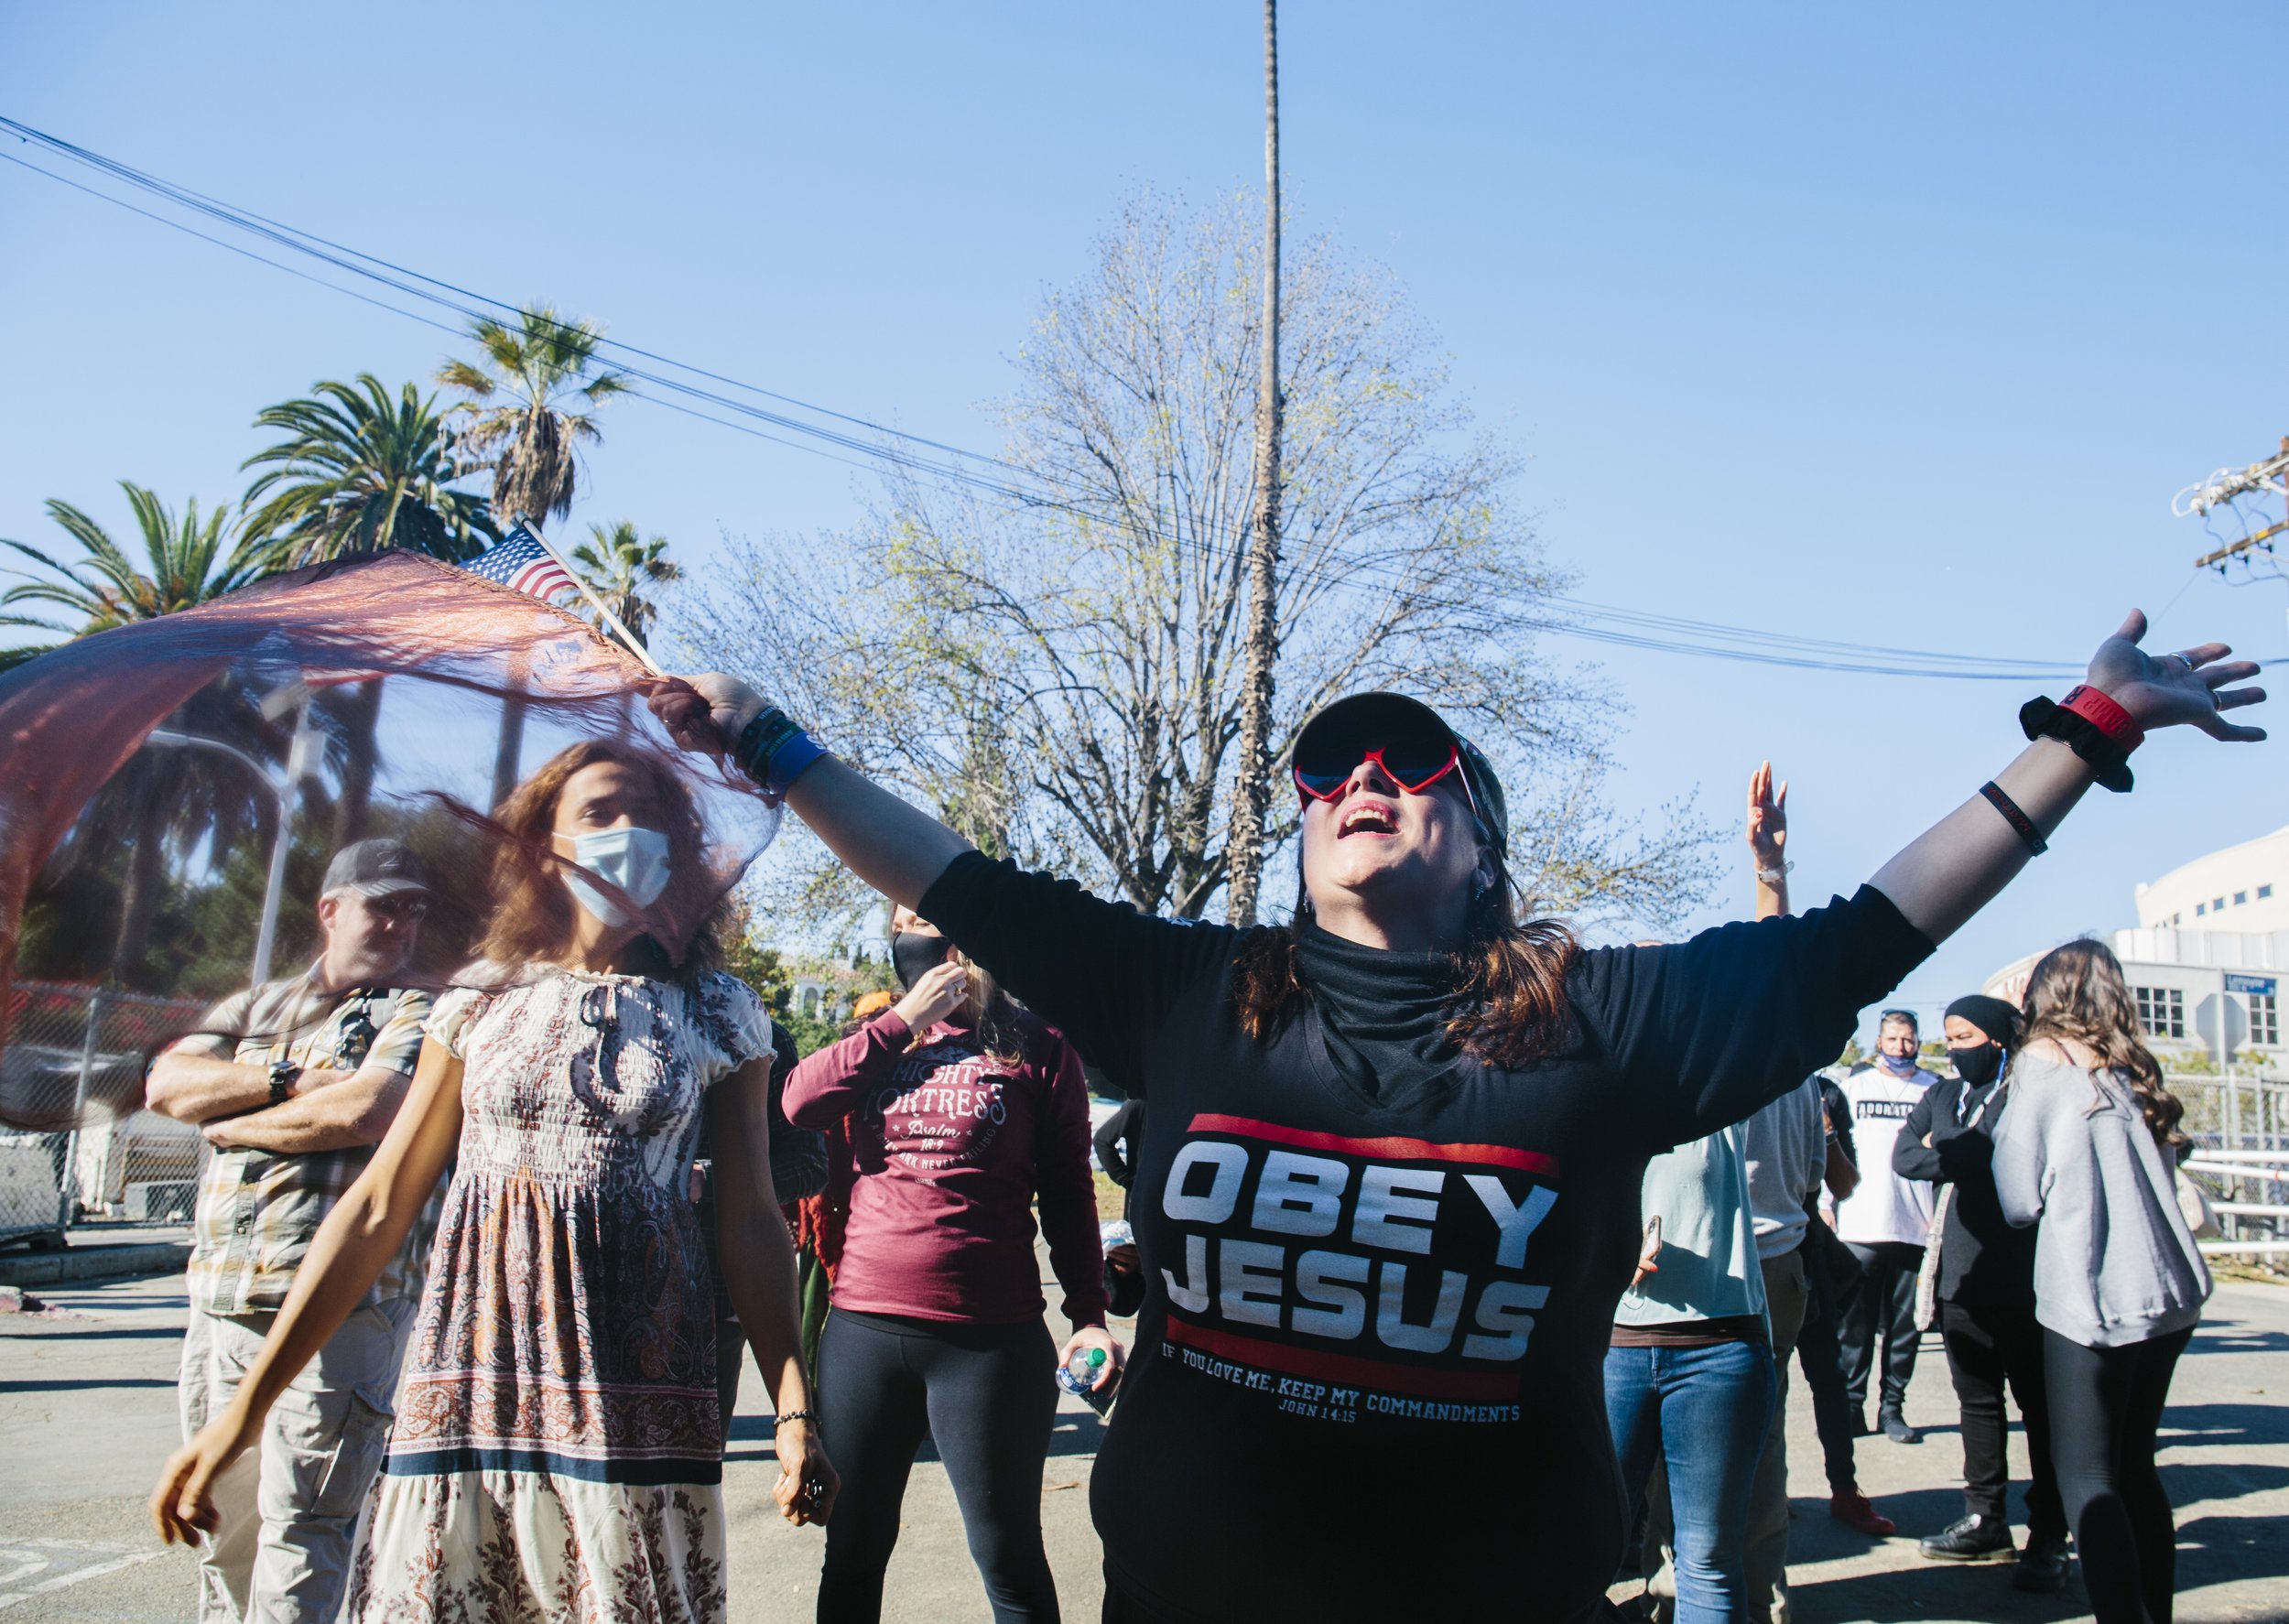  An anti-mask, evangelical group descended on Echo Park, an area with a large unhoused population, in Los Angeles, CA. December 2020. 